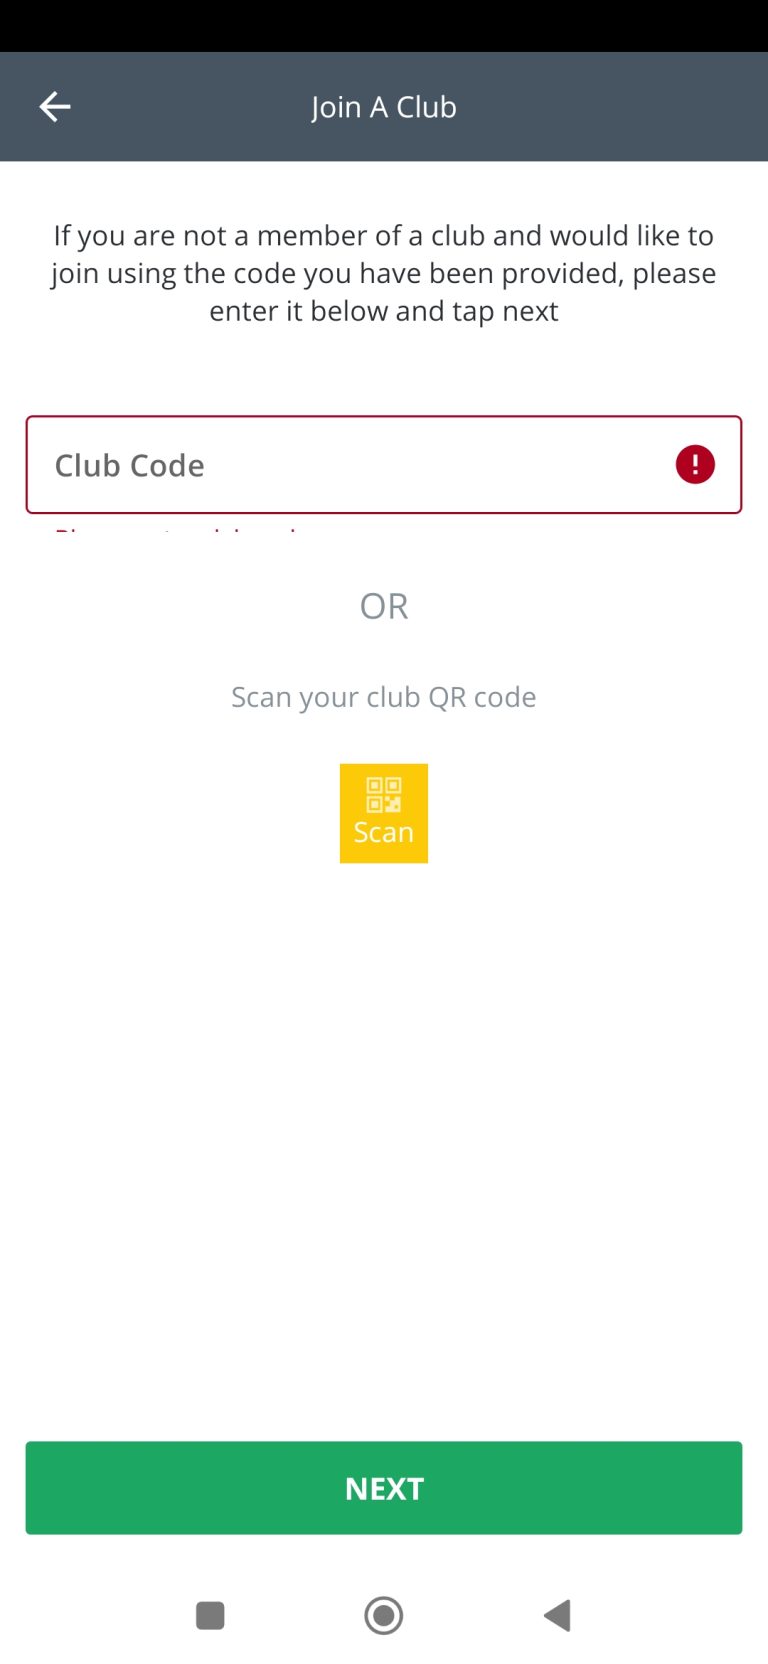 Warning for empty ‘Club Code’ field is not visible on ‘Join a Club’ page